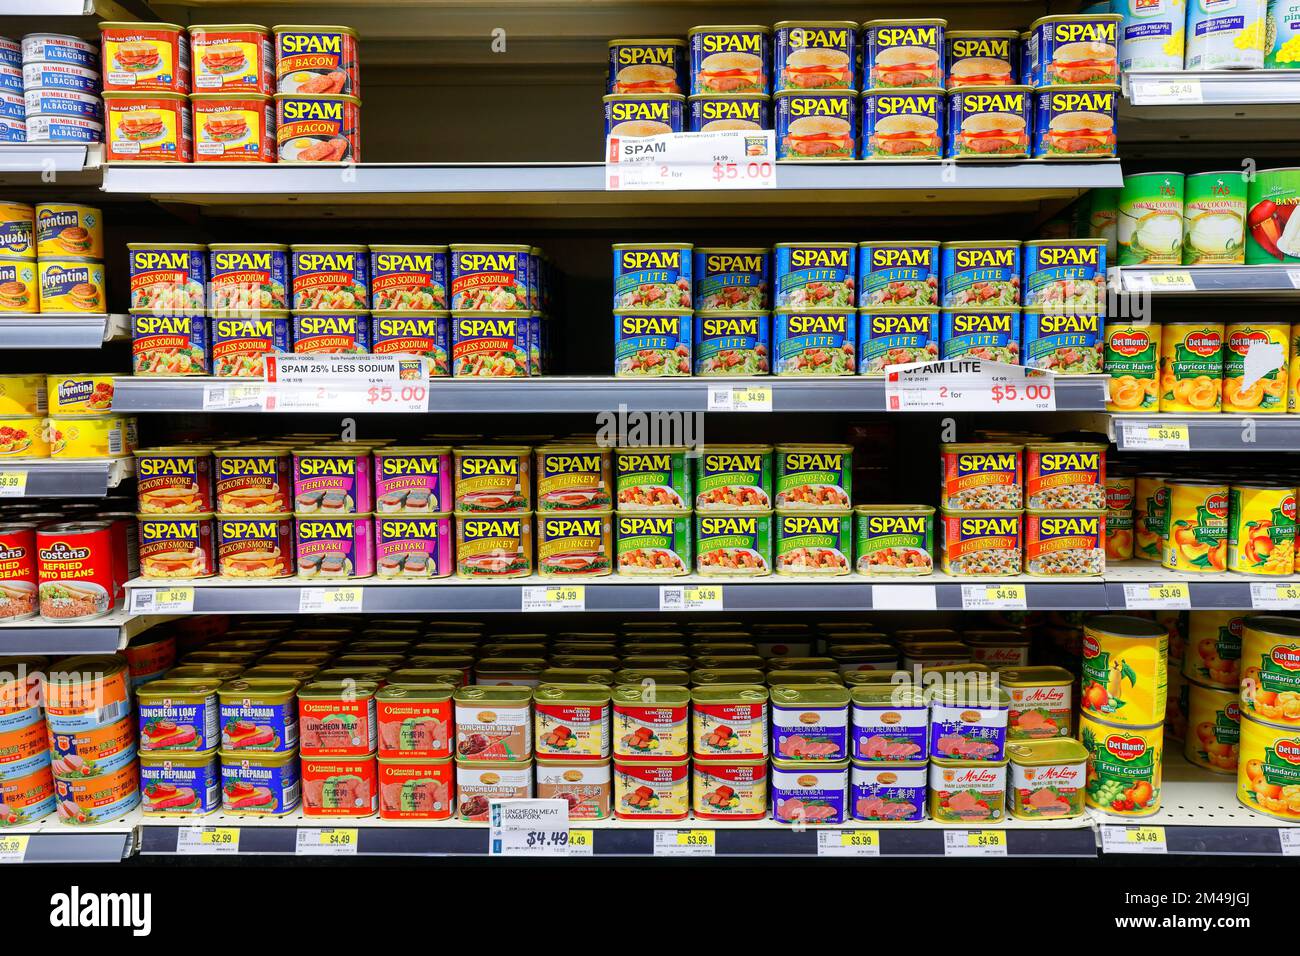 cans of Spam, various flavors of Spam, and other canned luncheon meat on a supermarket shelf. Stock Photo